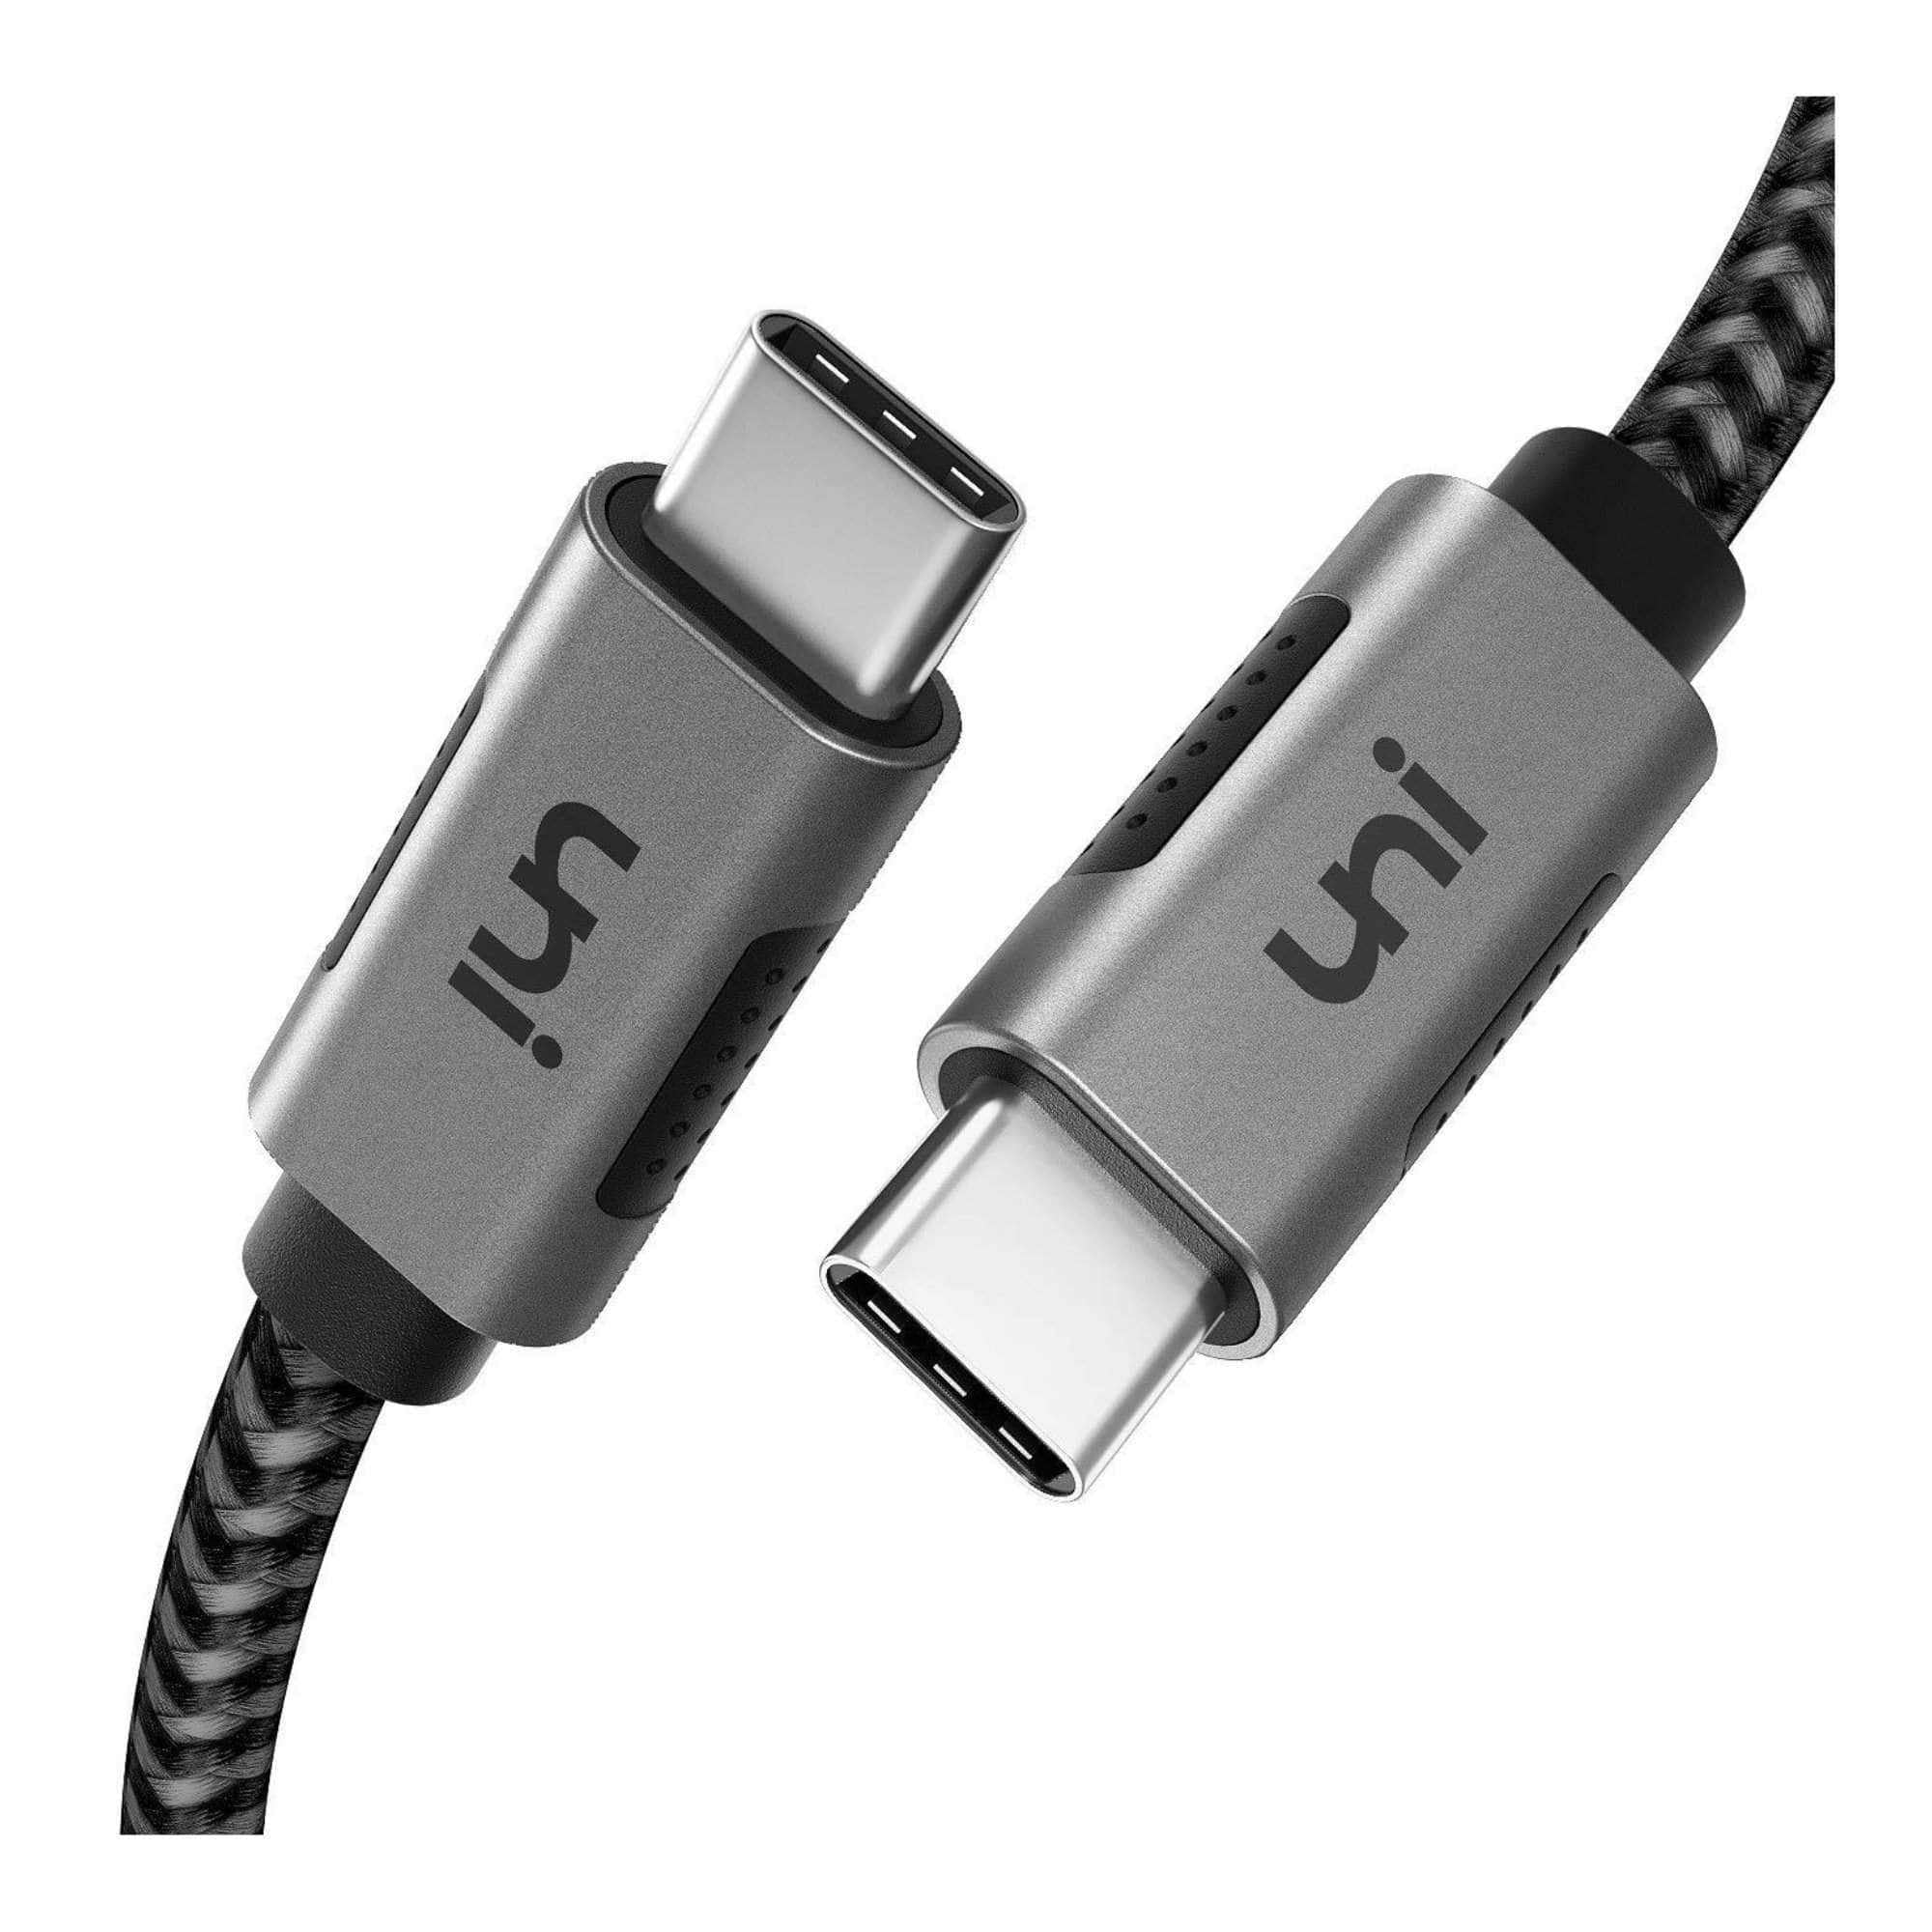 USB C Charger Cable, USB Type C to USB C | uni